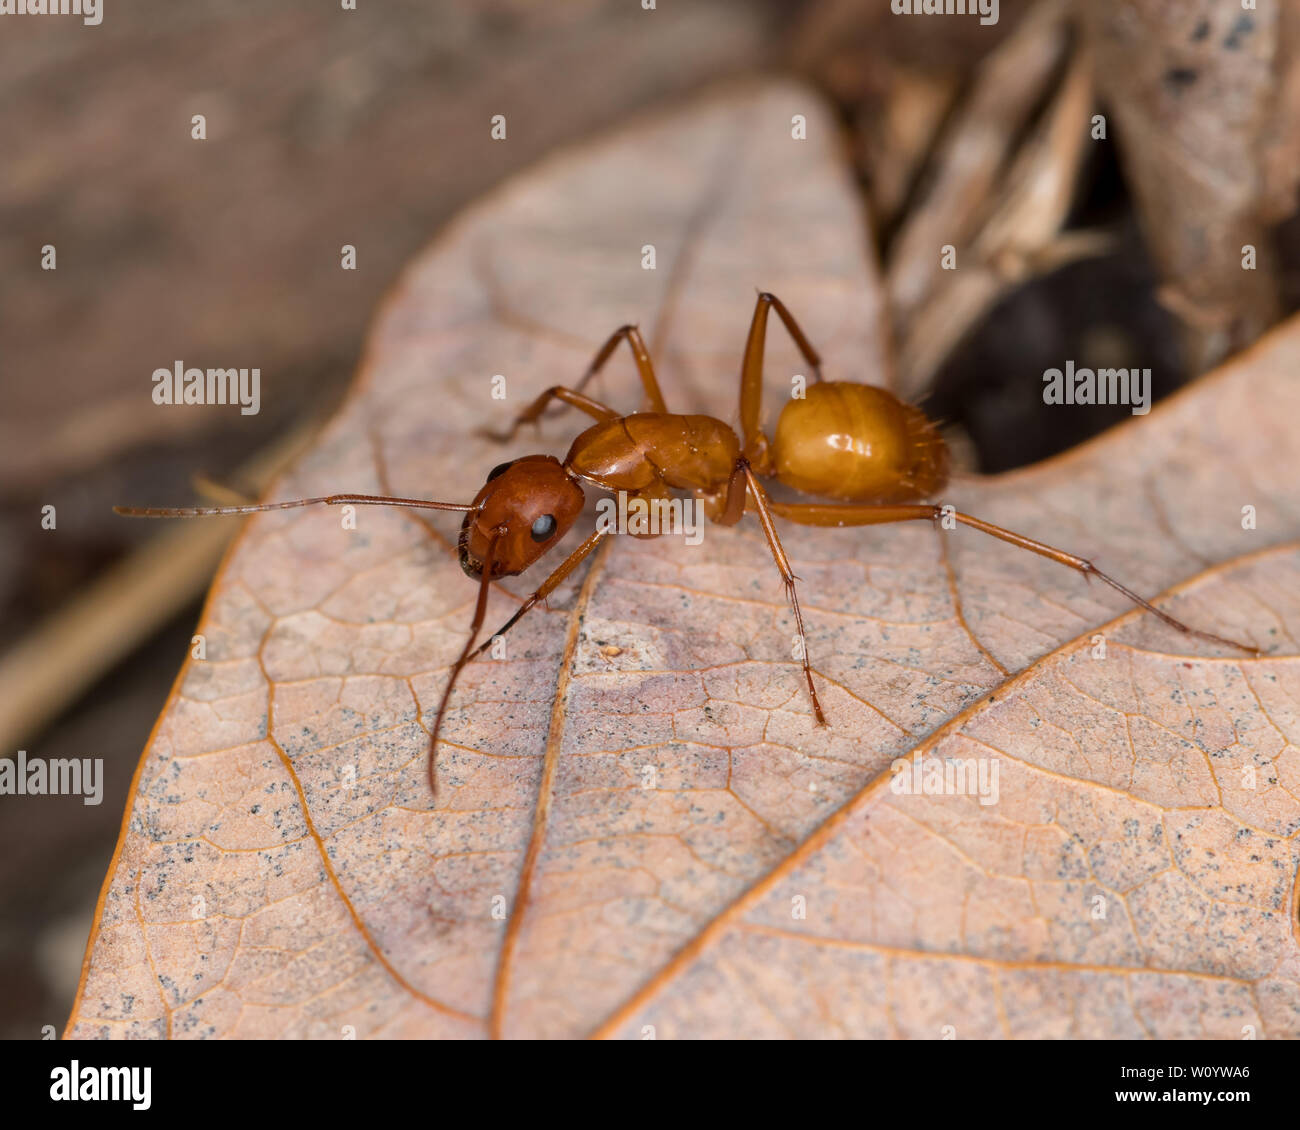 Large brown Camponotus ant crawling on leaf in forest Stock Photo